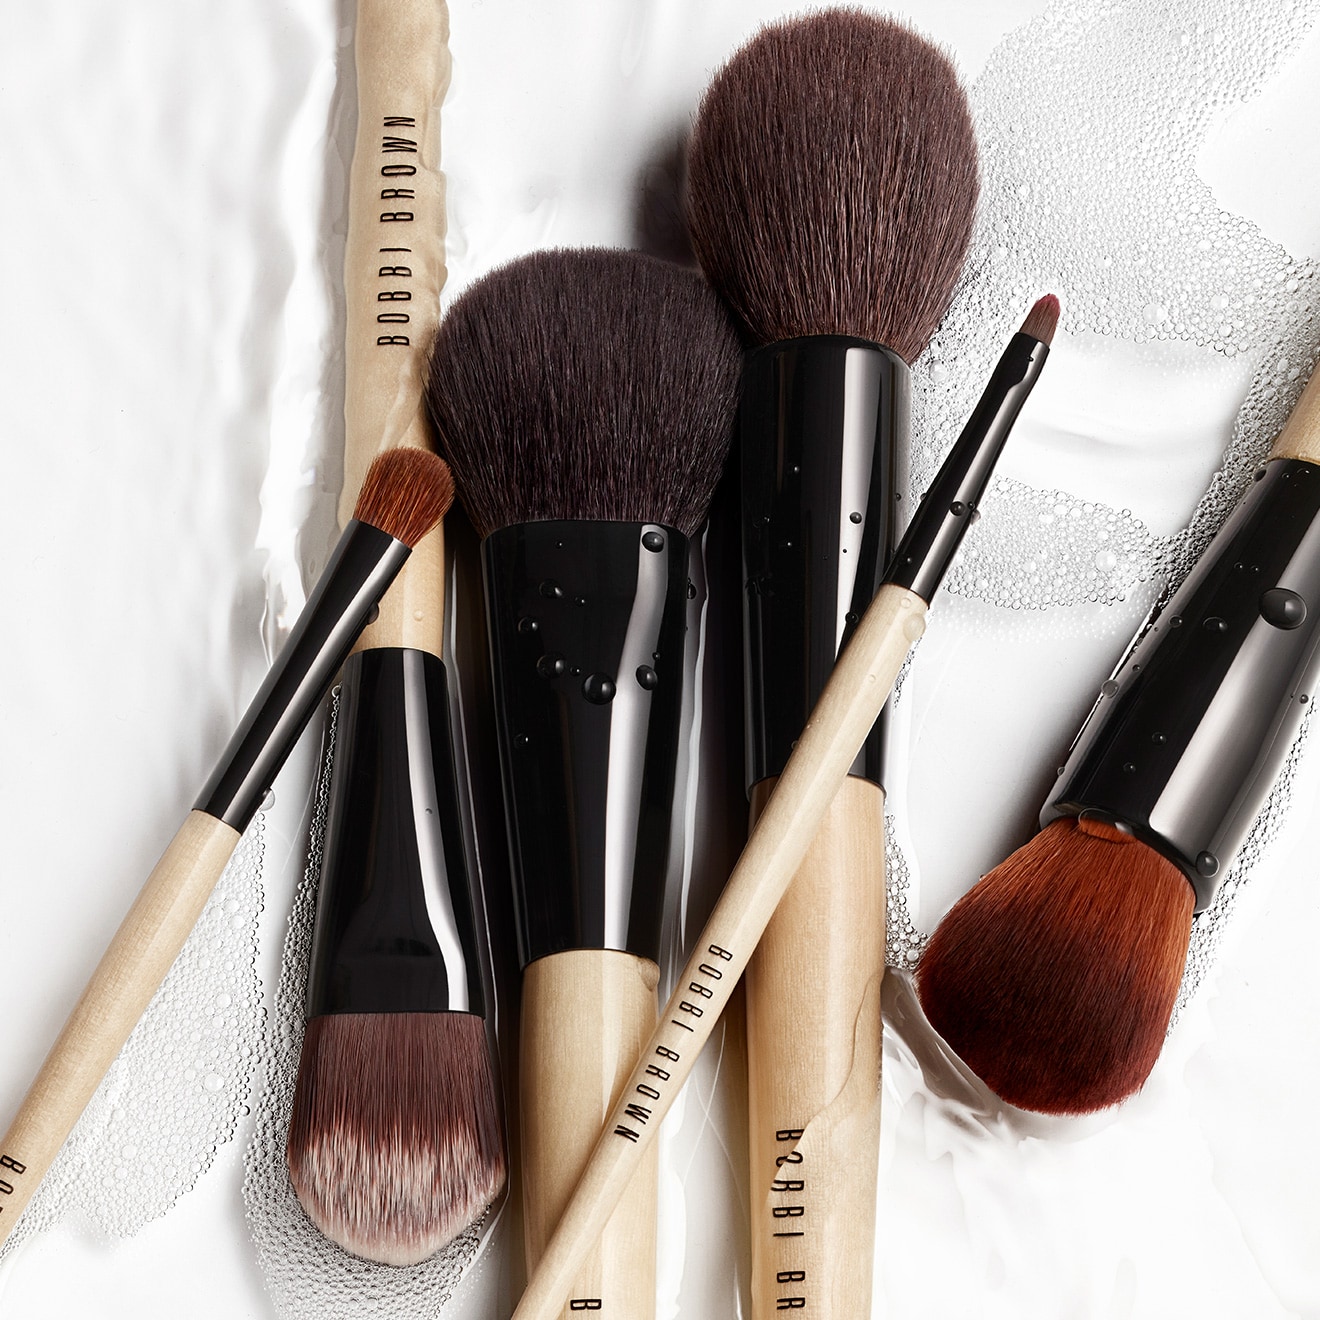 Selection of bestselling Bobbi Brown makeup brushes nesting in bubbly water